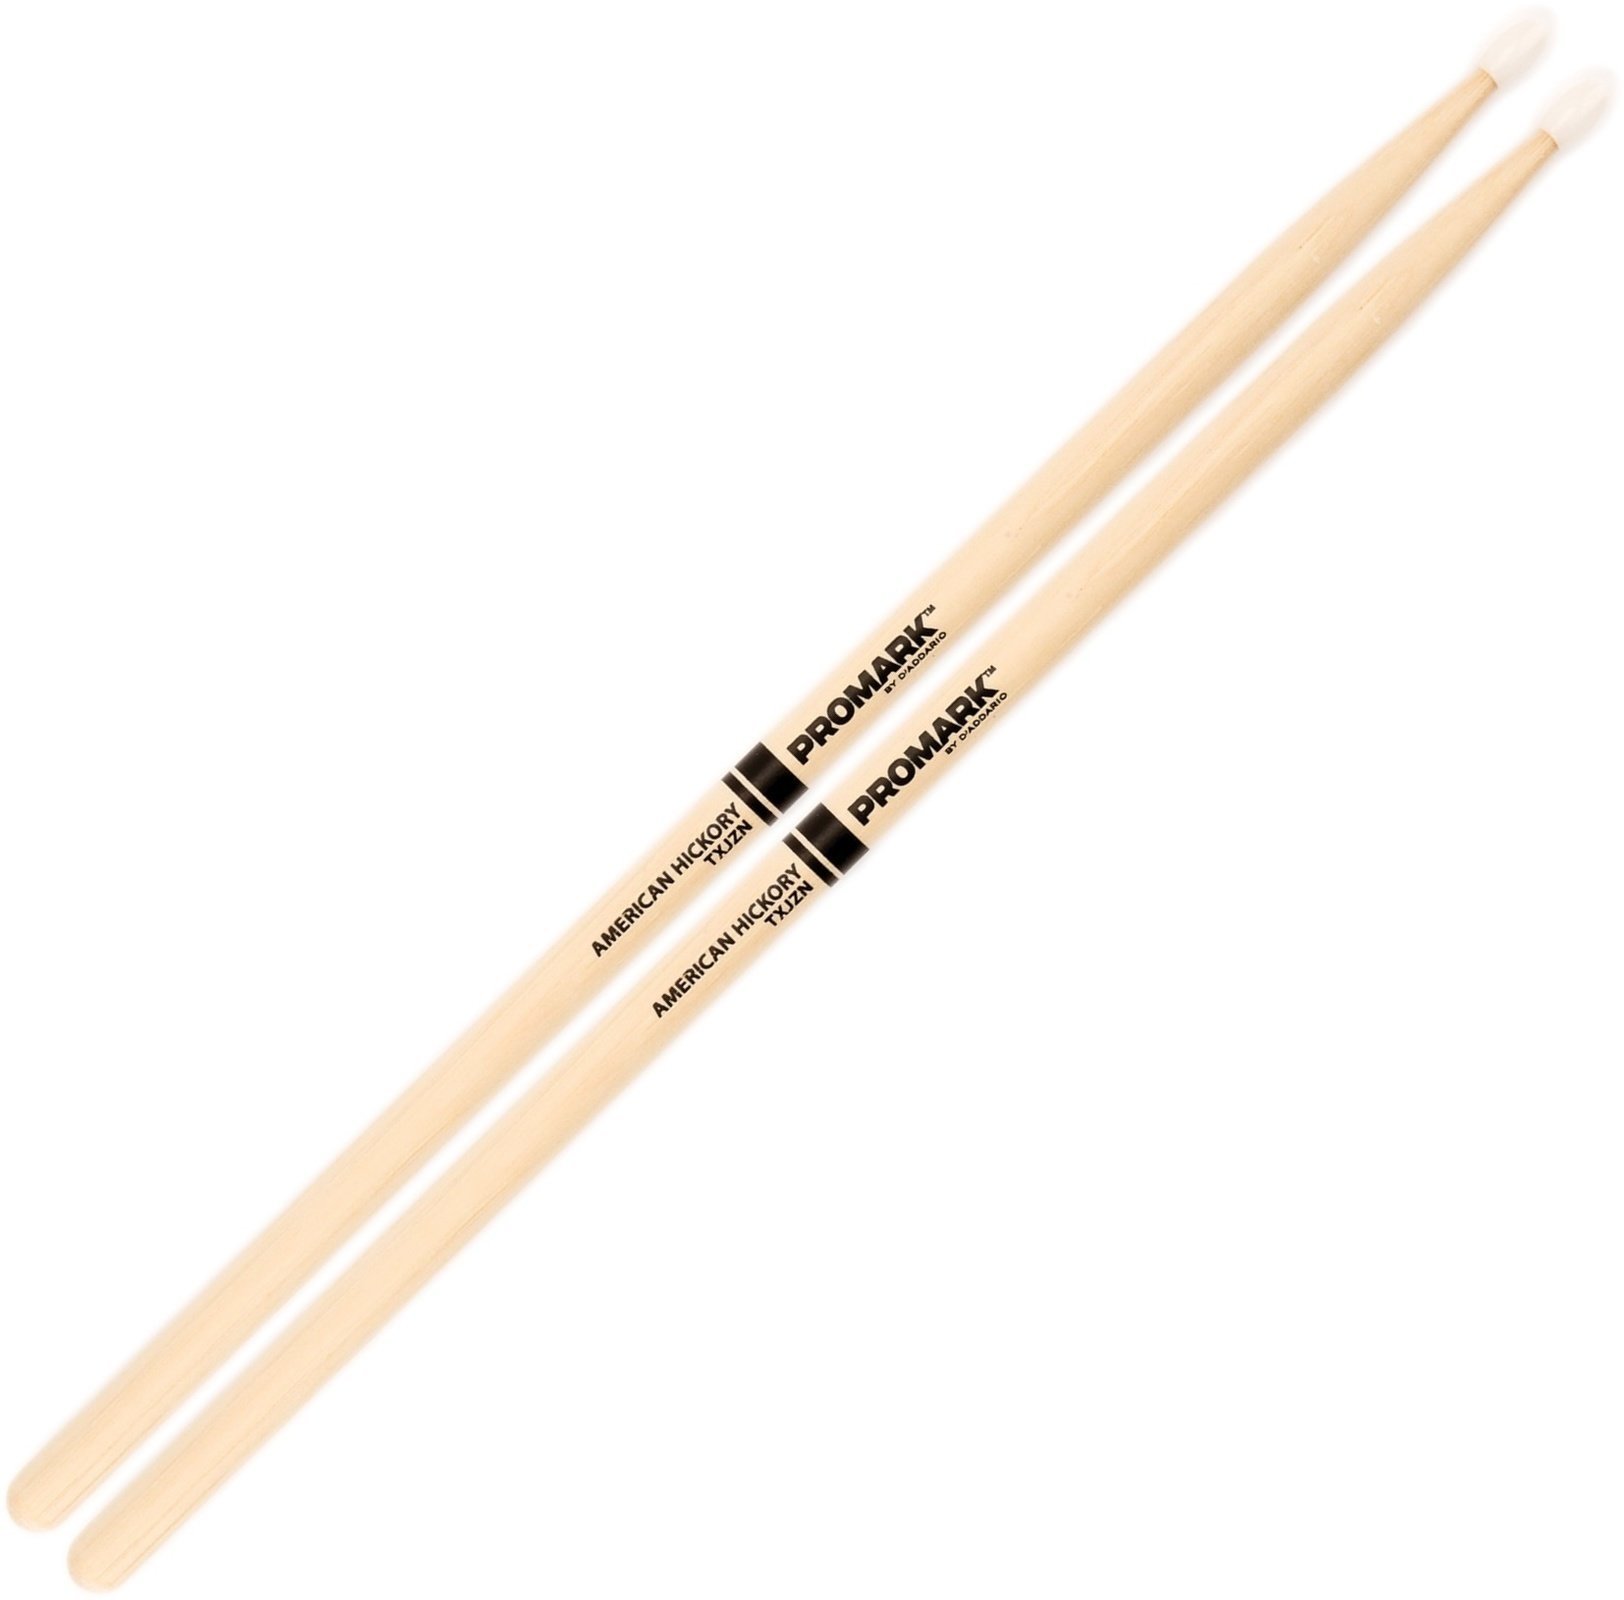 Baguettes Pro Mark TXJZN American Hickory 7A Jazz Baguettes